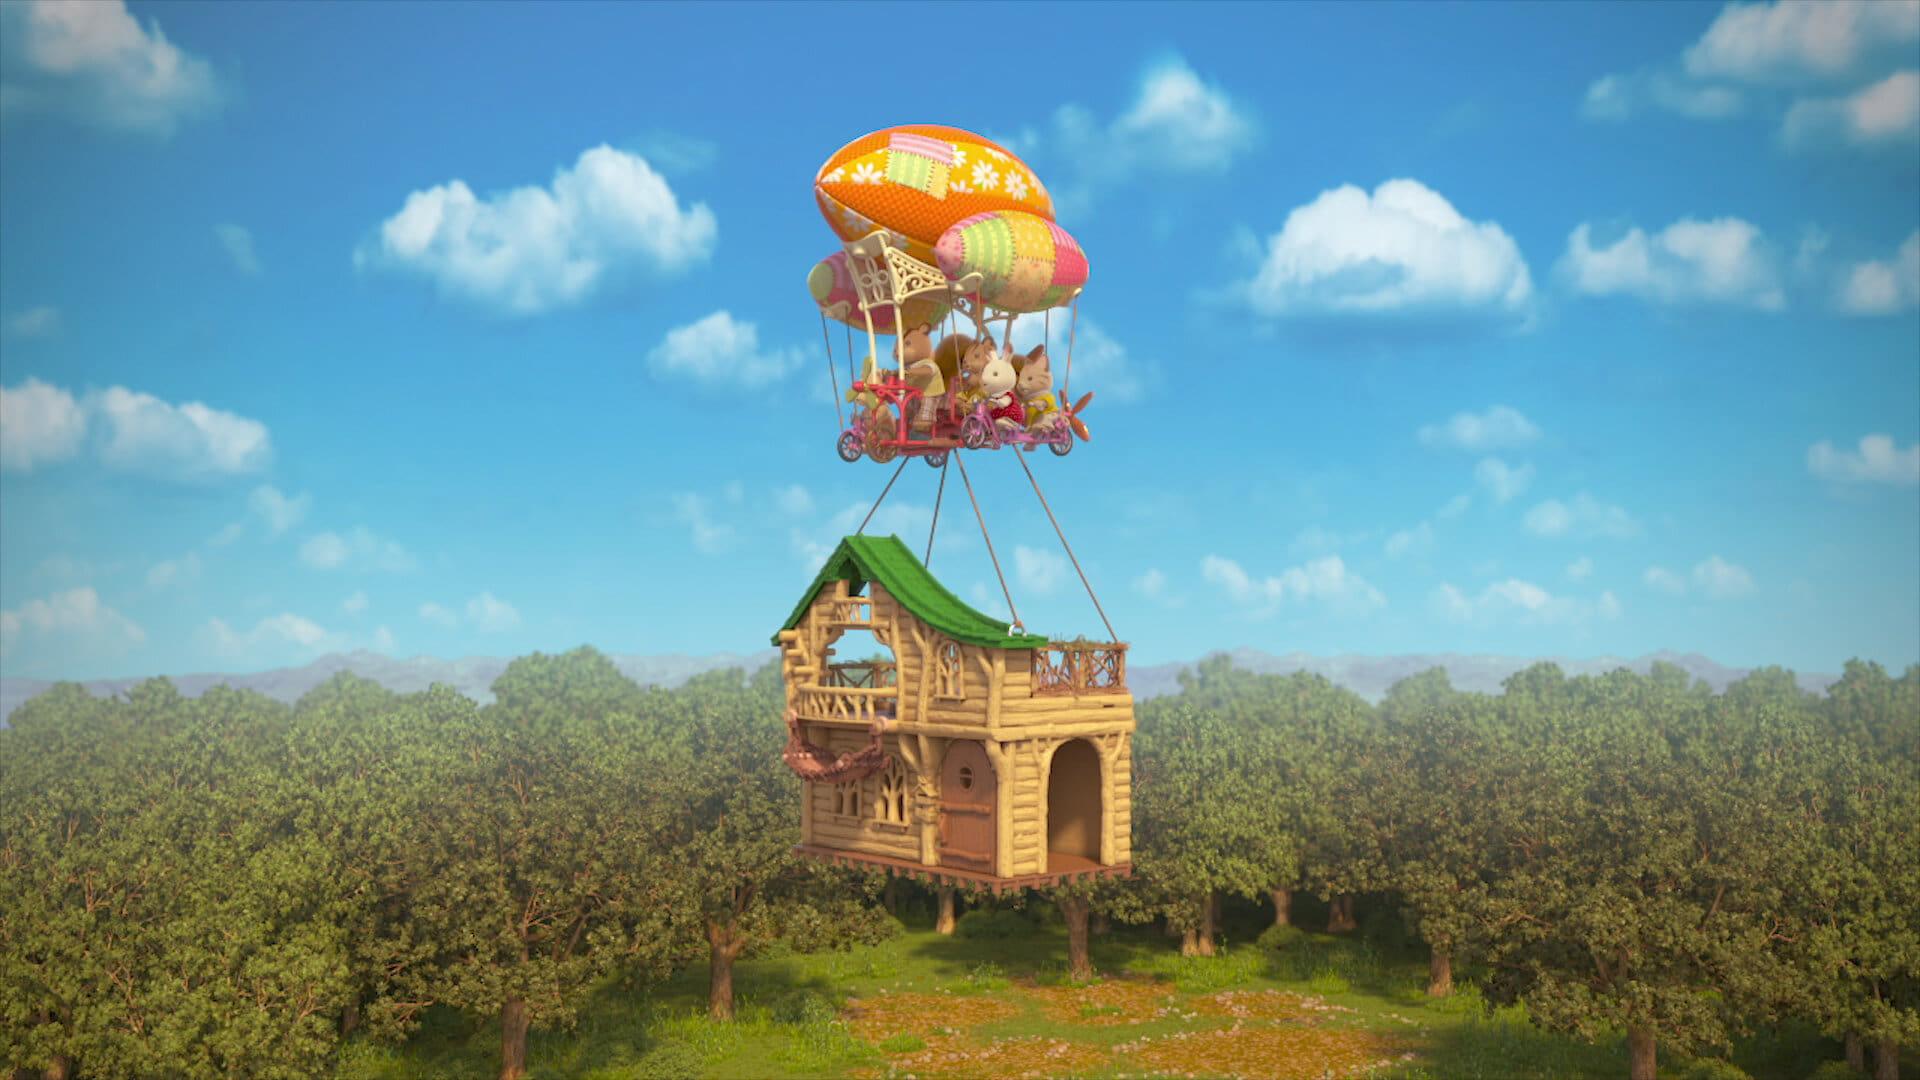 Calico Critters: Everyone's Big Dream Flying in the Sky backdrop